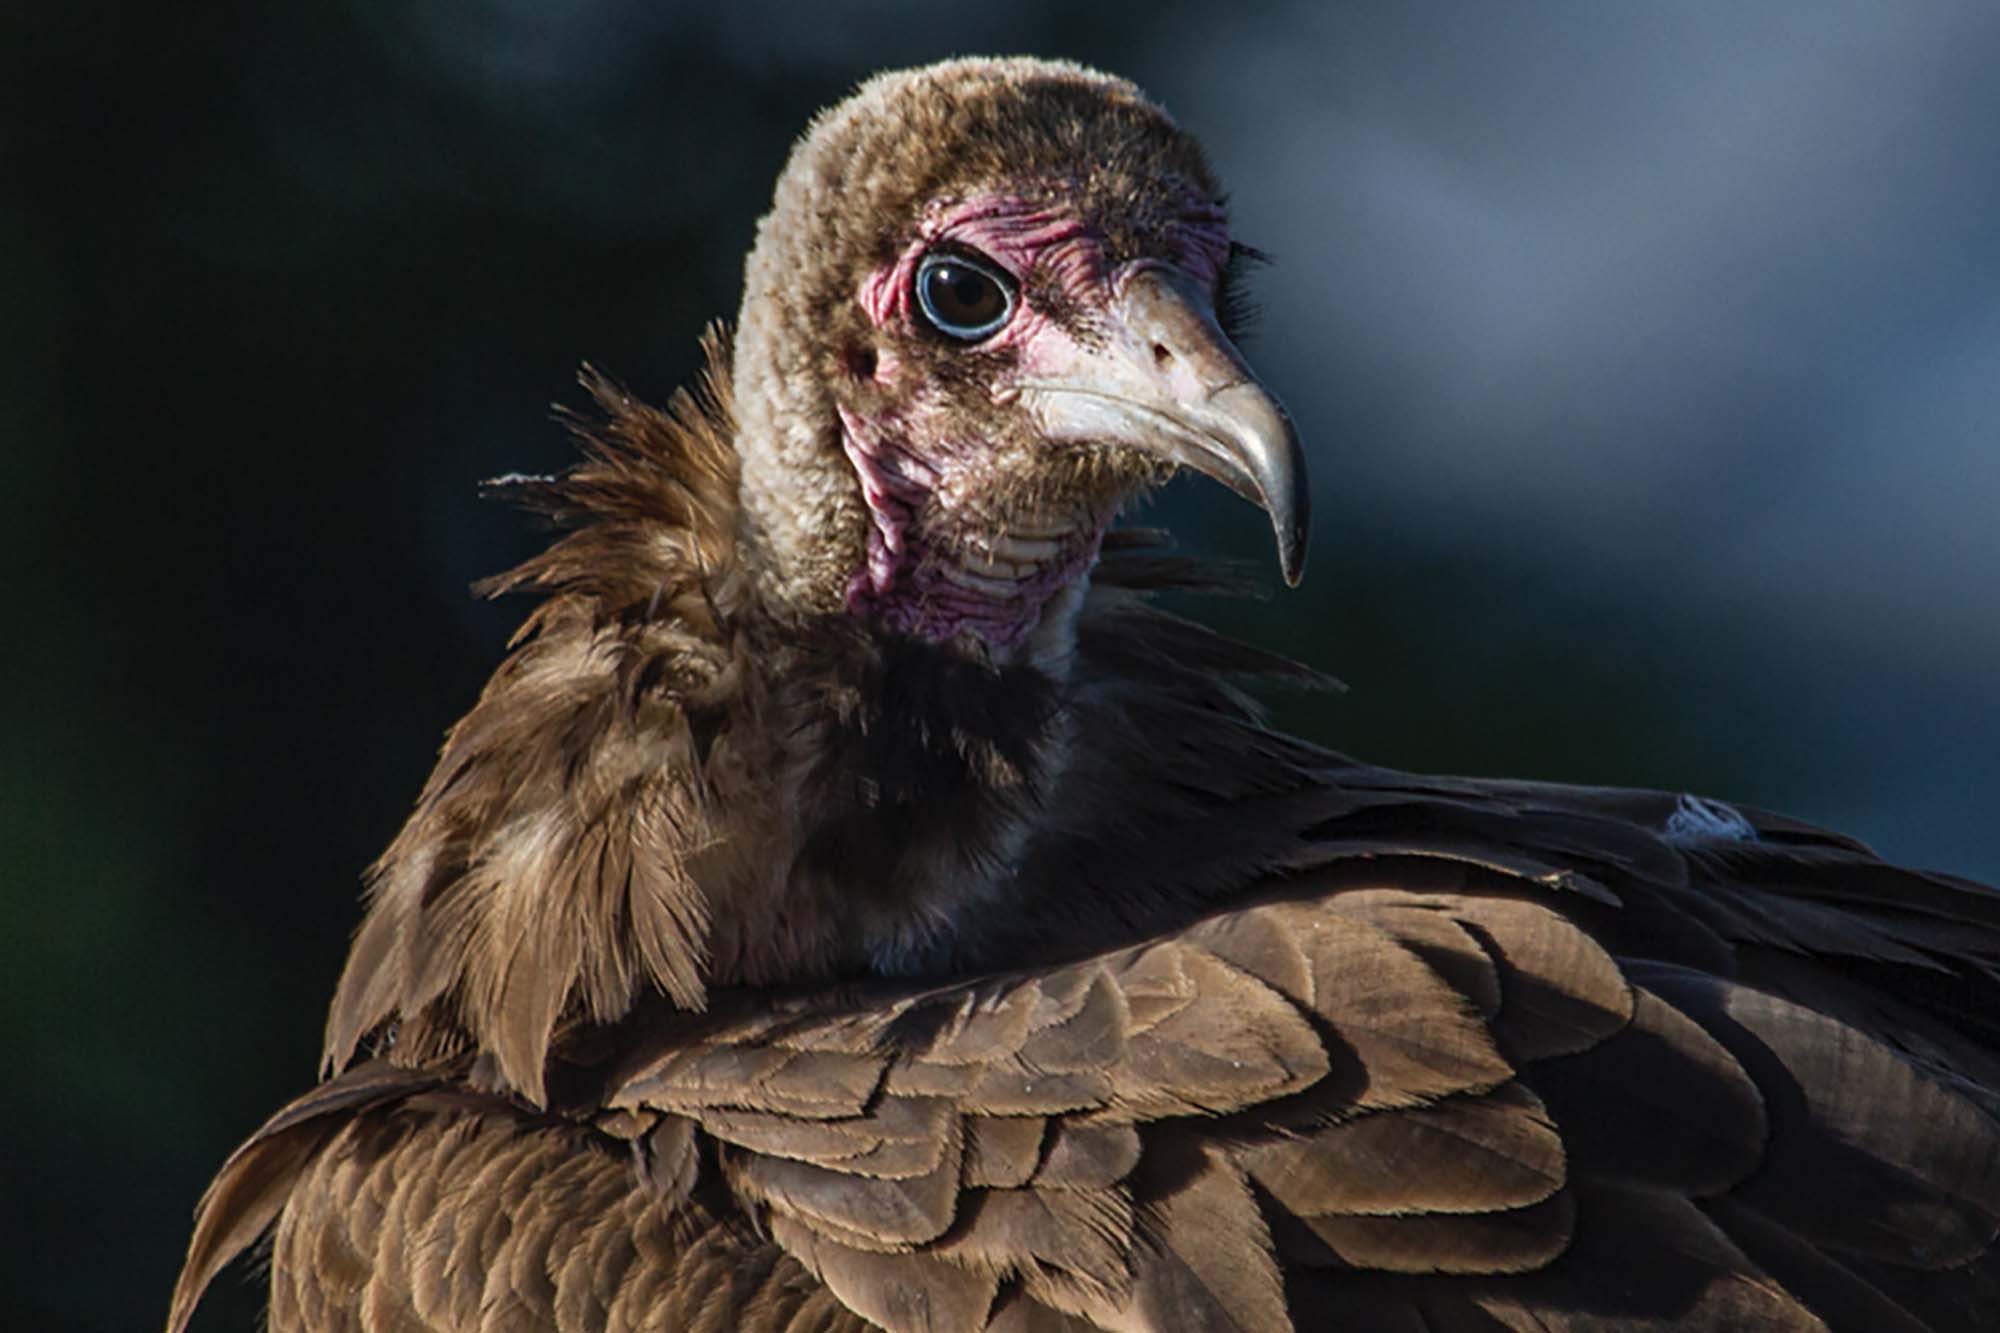 Why we need vultures - Vulture Conservation Foundation